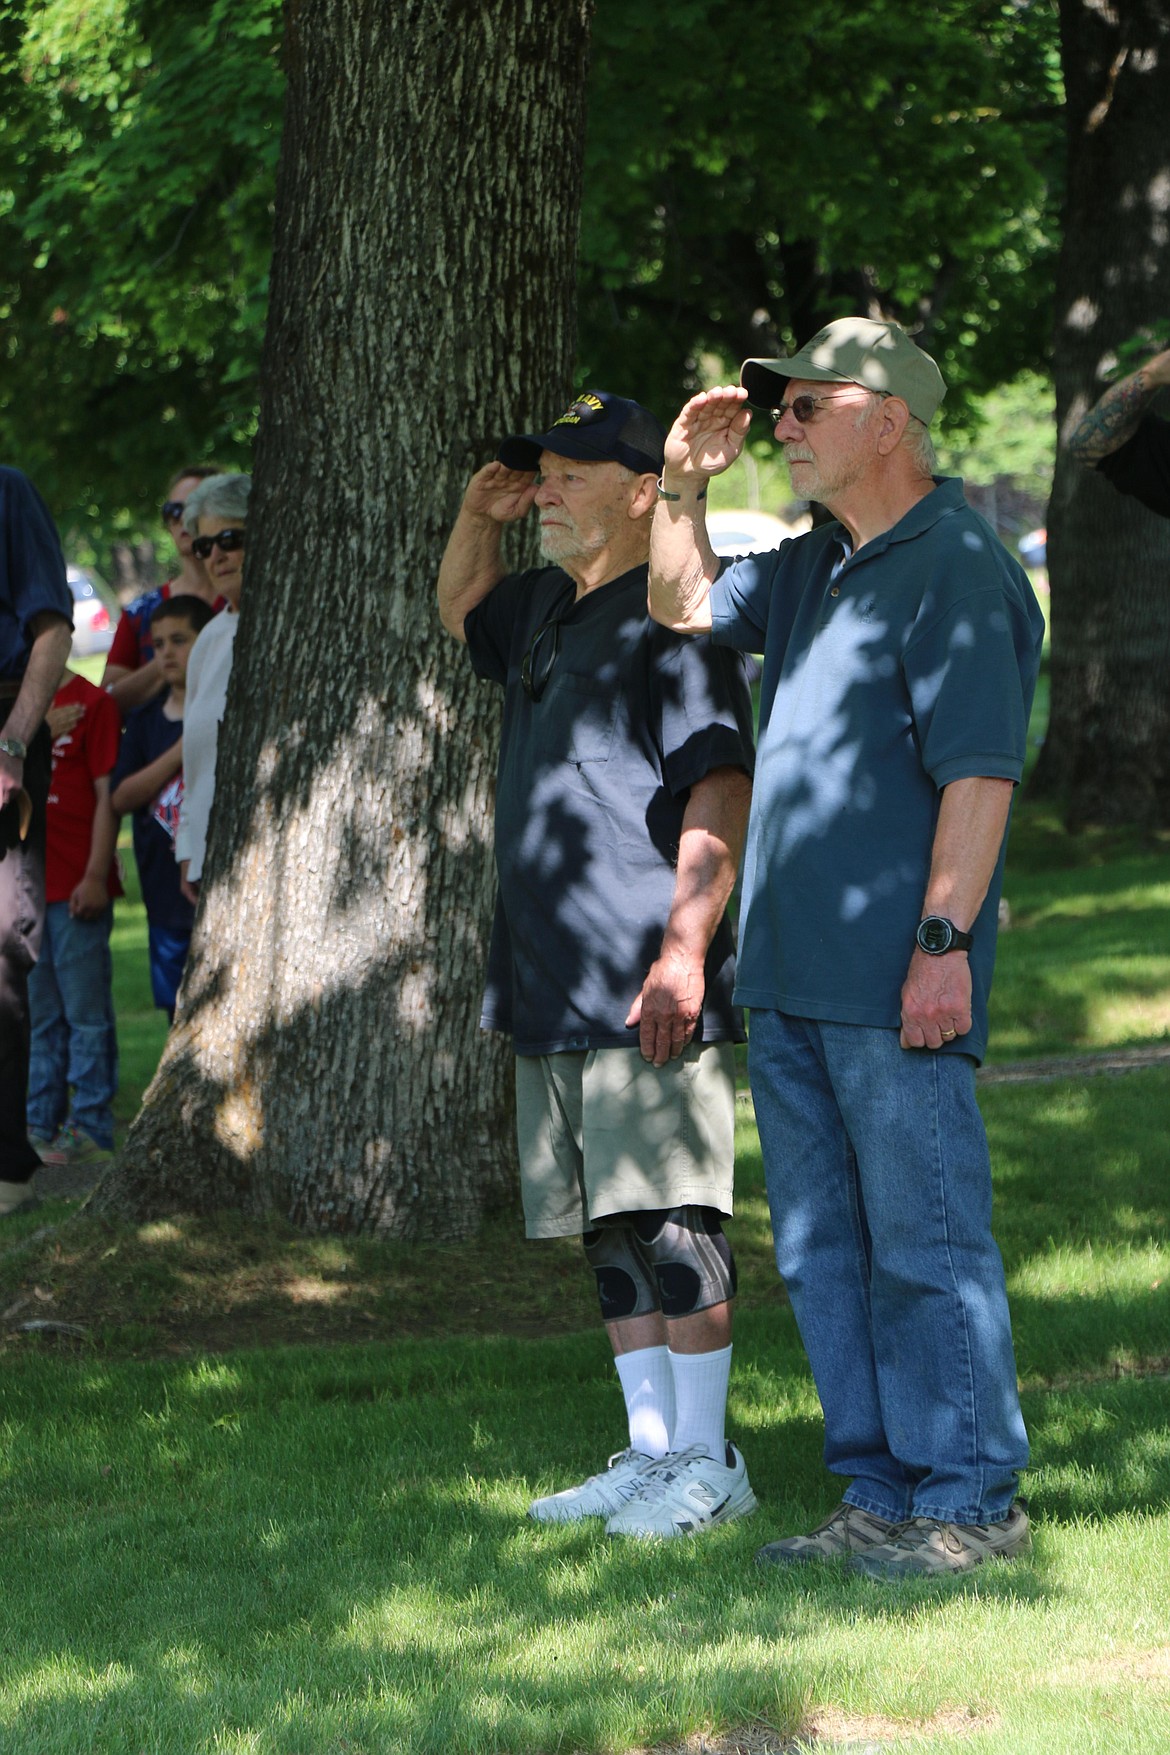 A pair of veterans salute during the playing of "Taps" at Monday's Memorial Day ceremony at Pinecrest Cemetery.